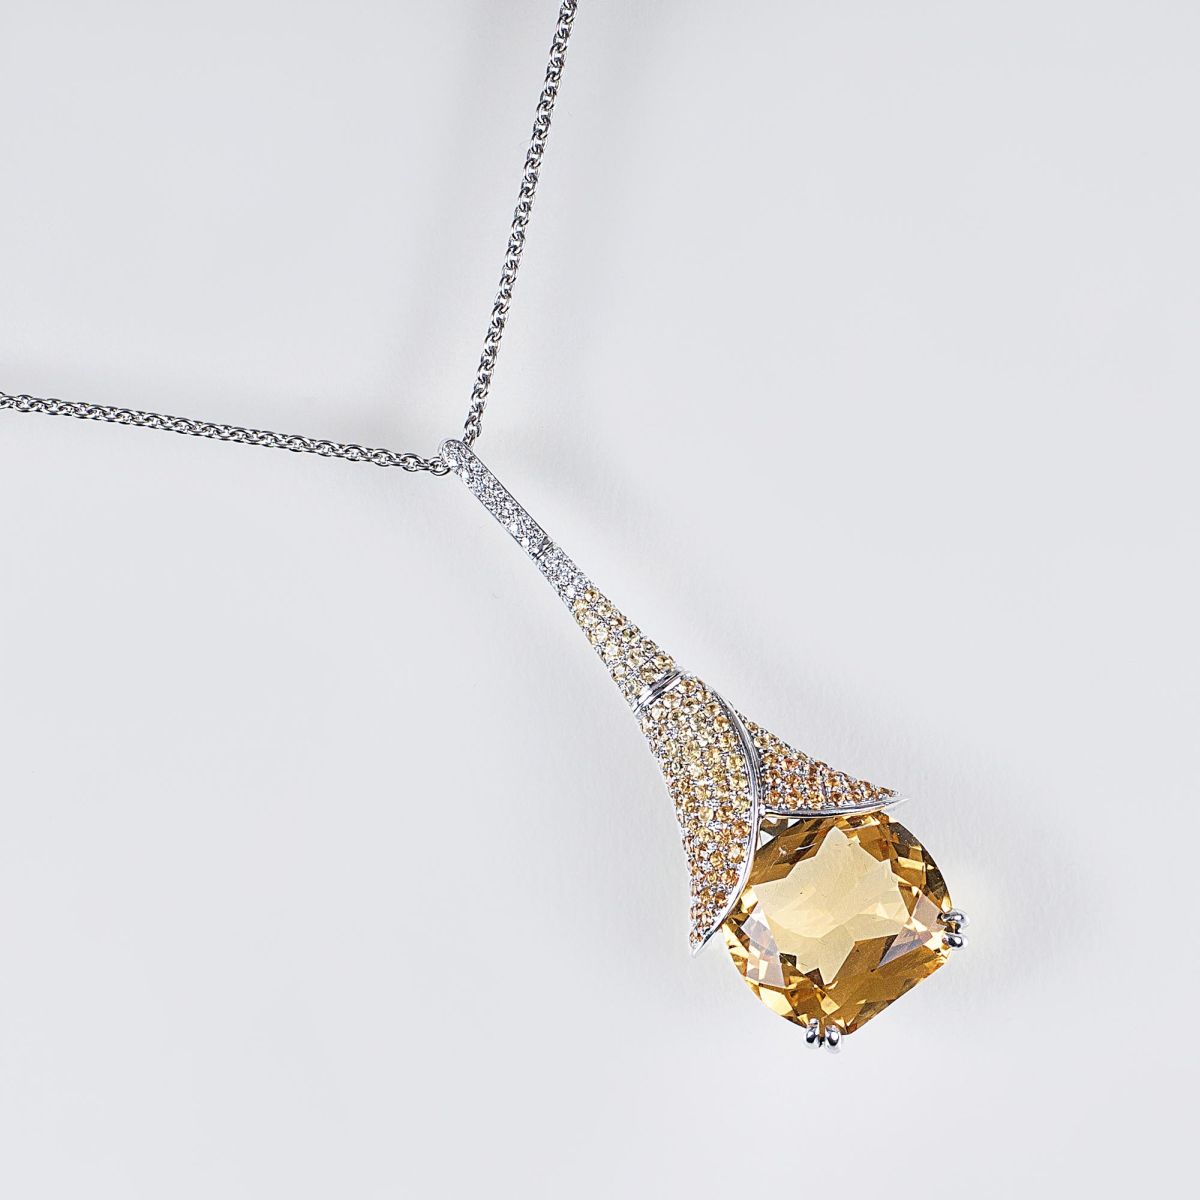 A Citrin Pendant 'Angel Trumpets' with Yellow Sapphires